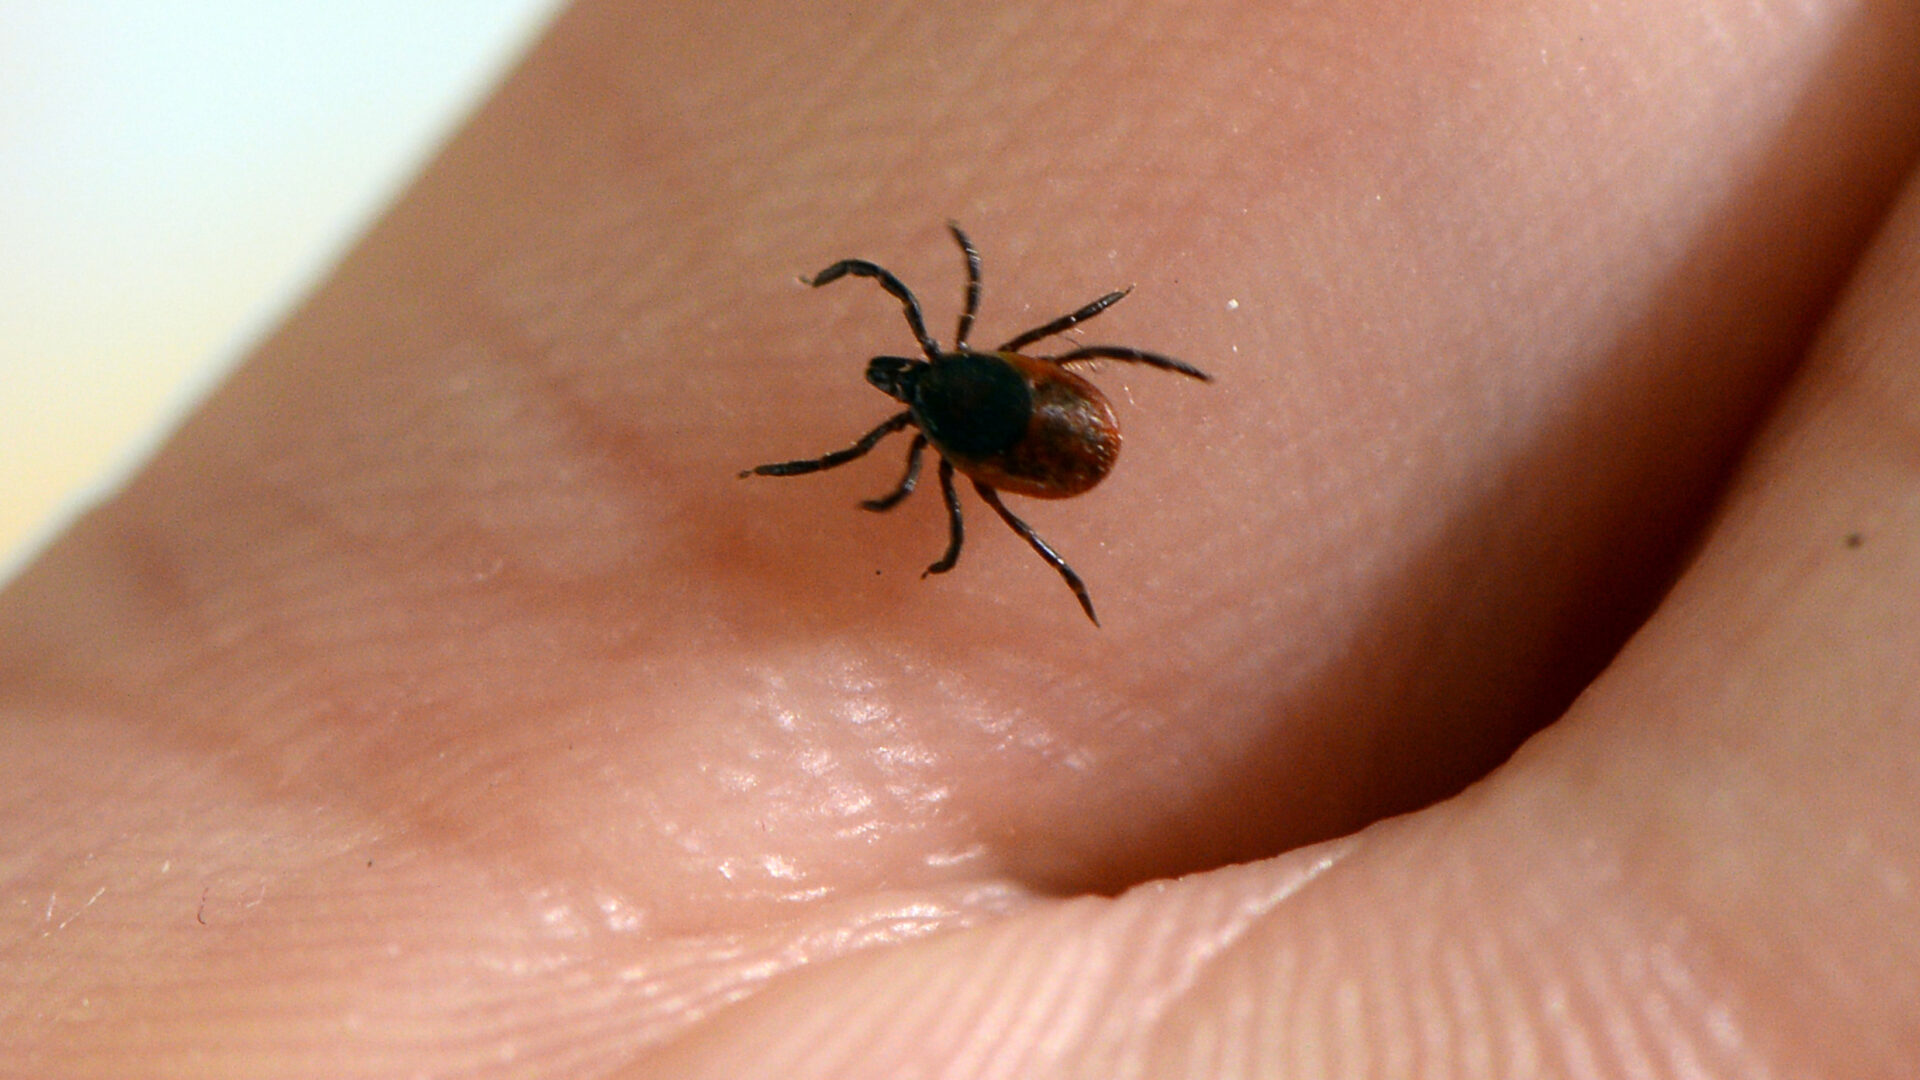 A picture taken at the French National Institute of Agricultural Research (INRA) in Maison-Alfort, on July 20, 2016 shows a tick, whose bite can transmit the Lyme disease. (Photo by BERTRAND GUAY / AFP) (Photo by BERTRAND GUAY/AFP via Getty Images)